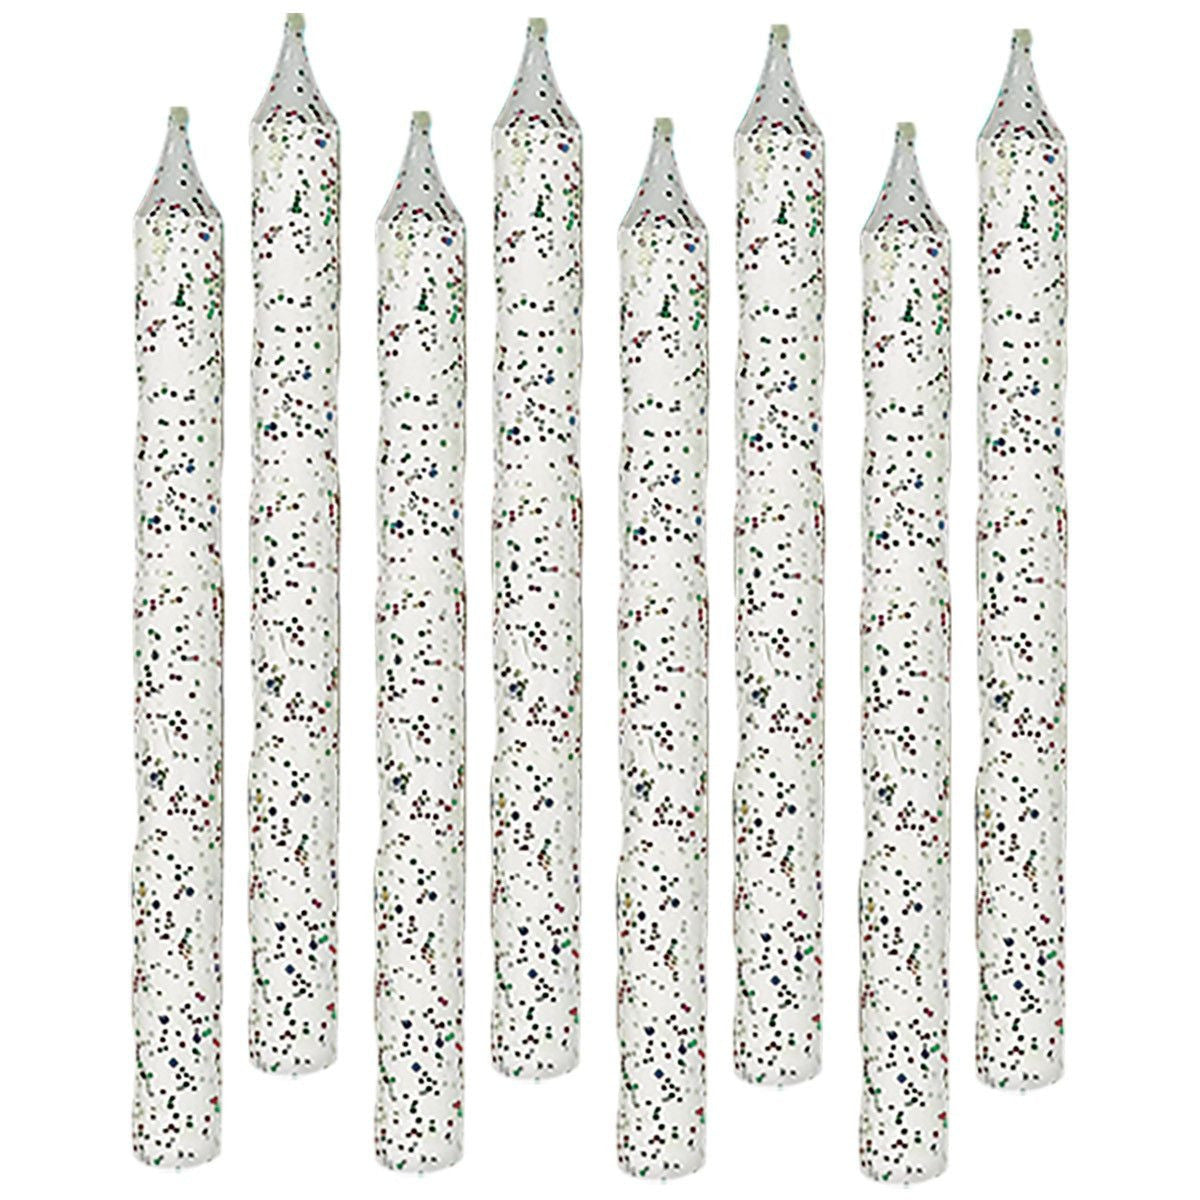 Amscan CANDLES Large Glitter Spiral Candles - White